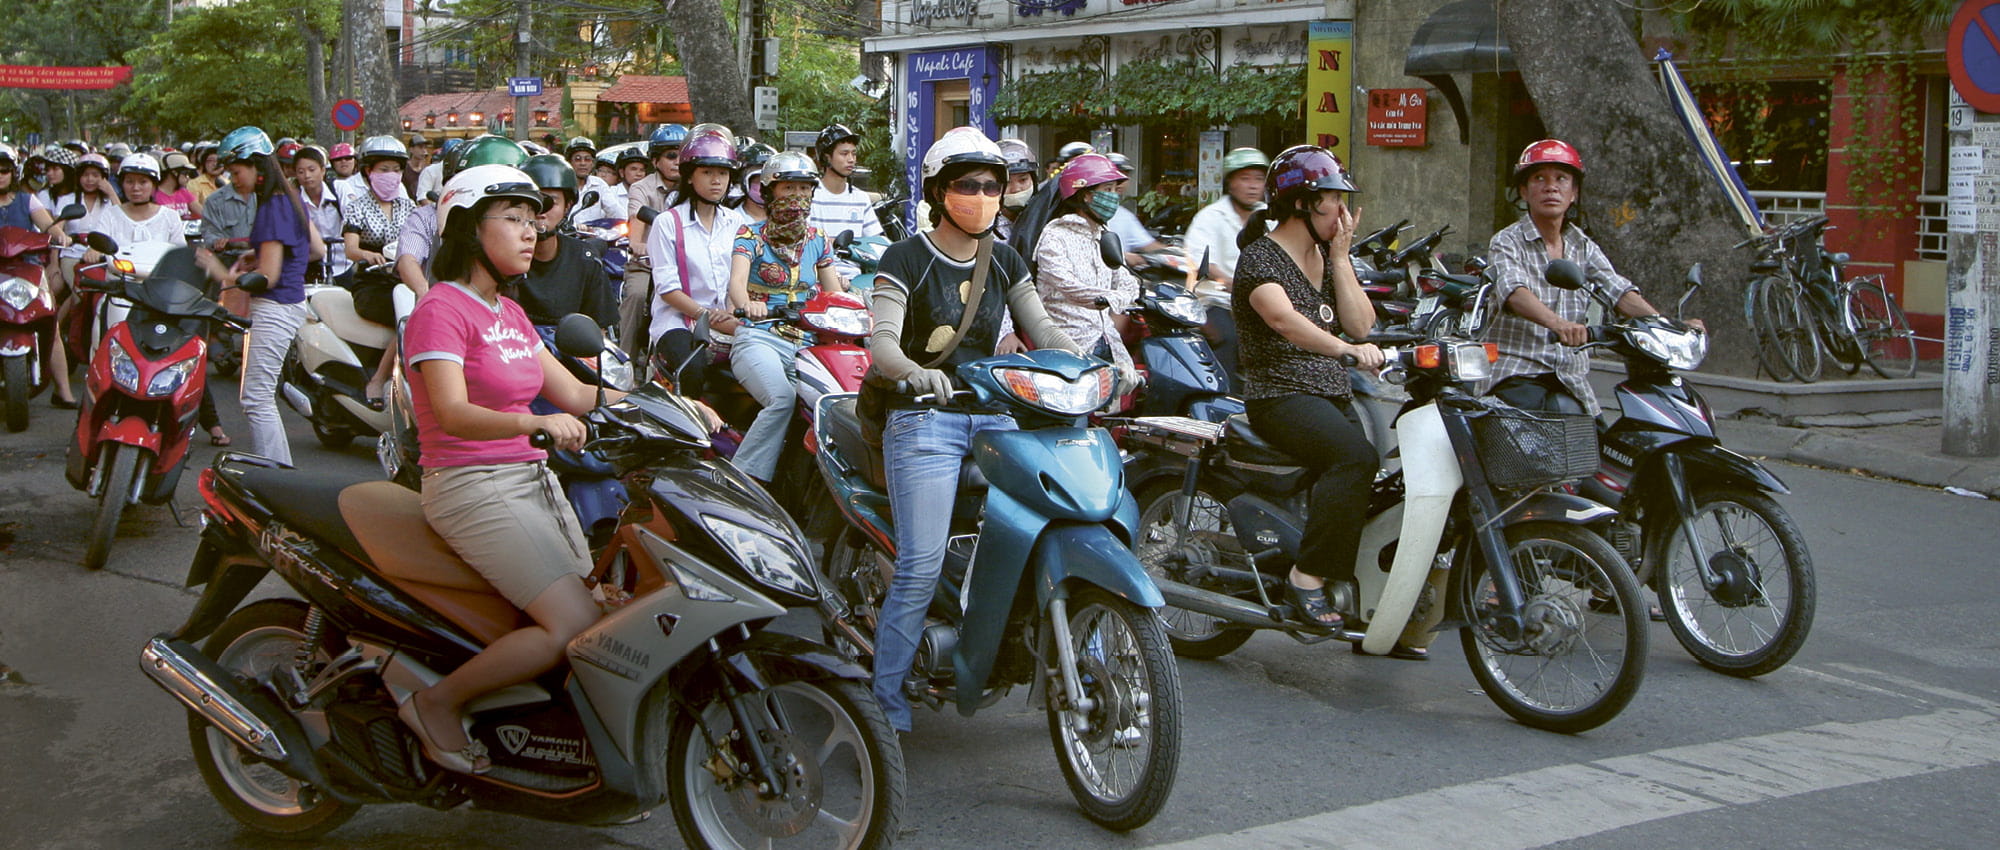 A crowd of motorcyclists are waiting at an intersection.